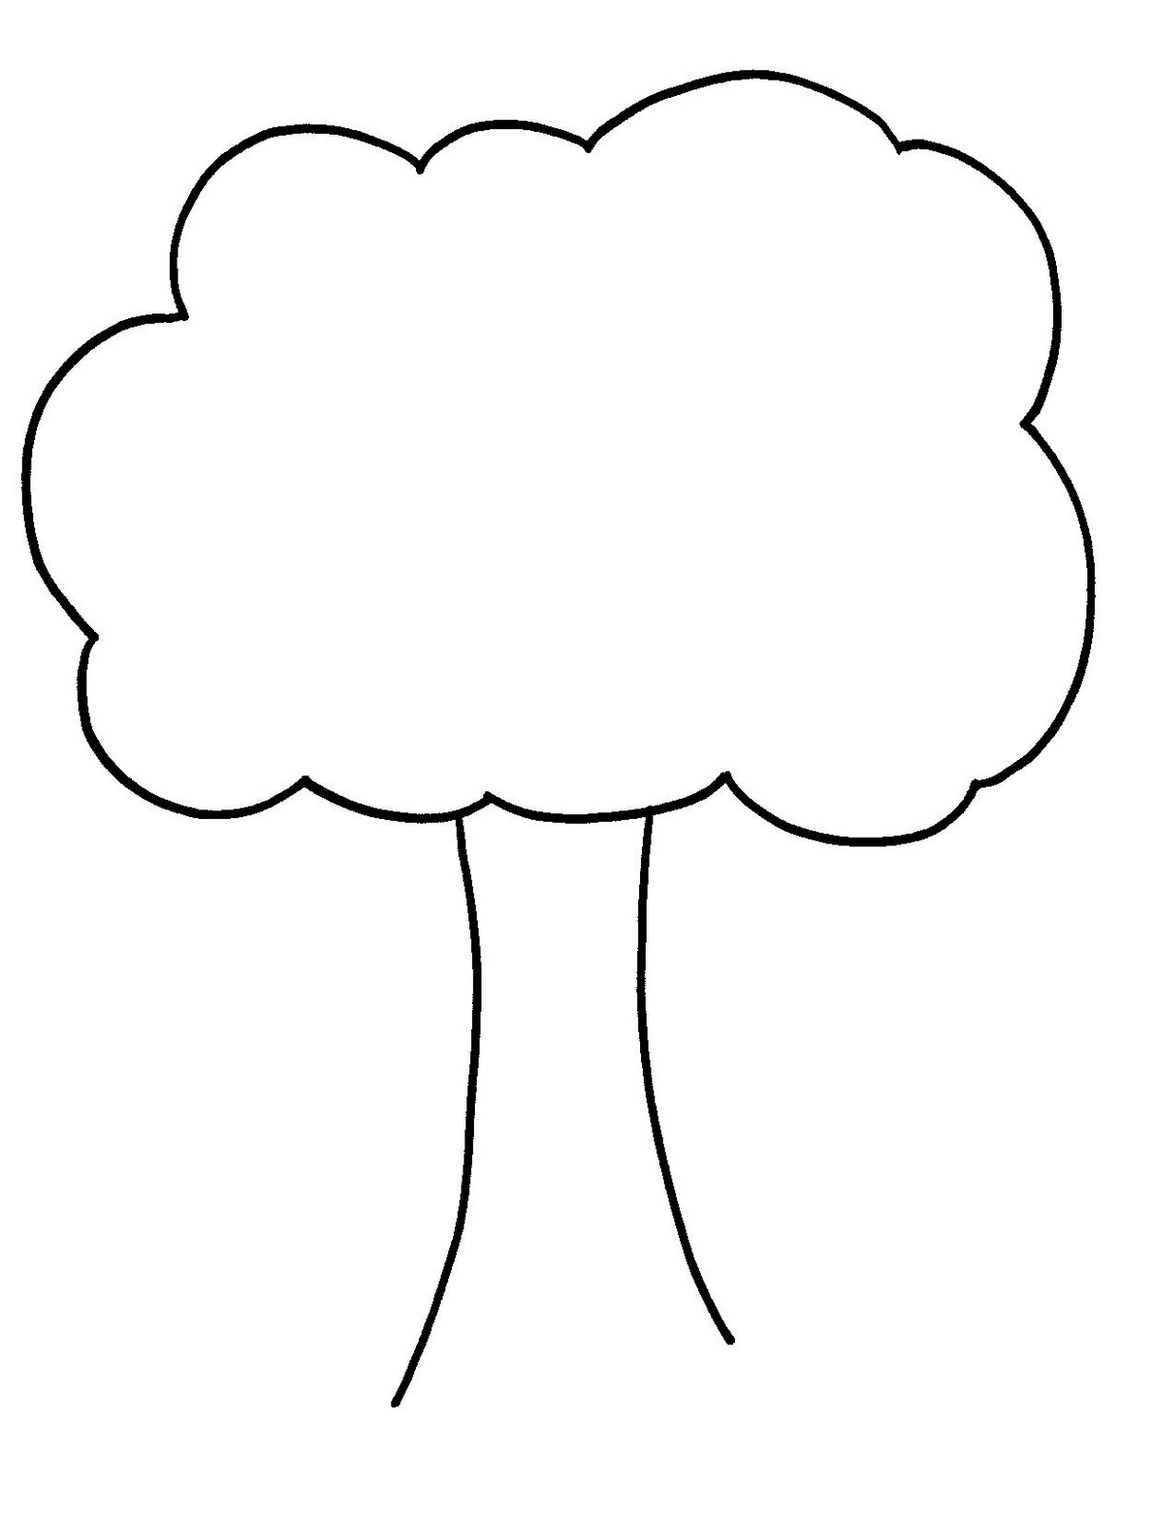 outline-of-tree-branches-clipart-best